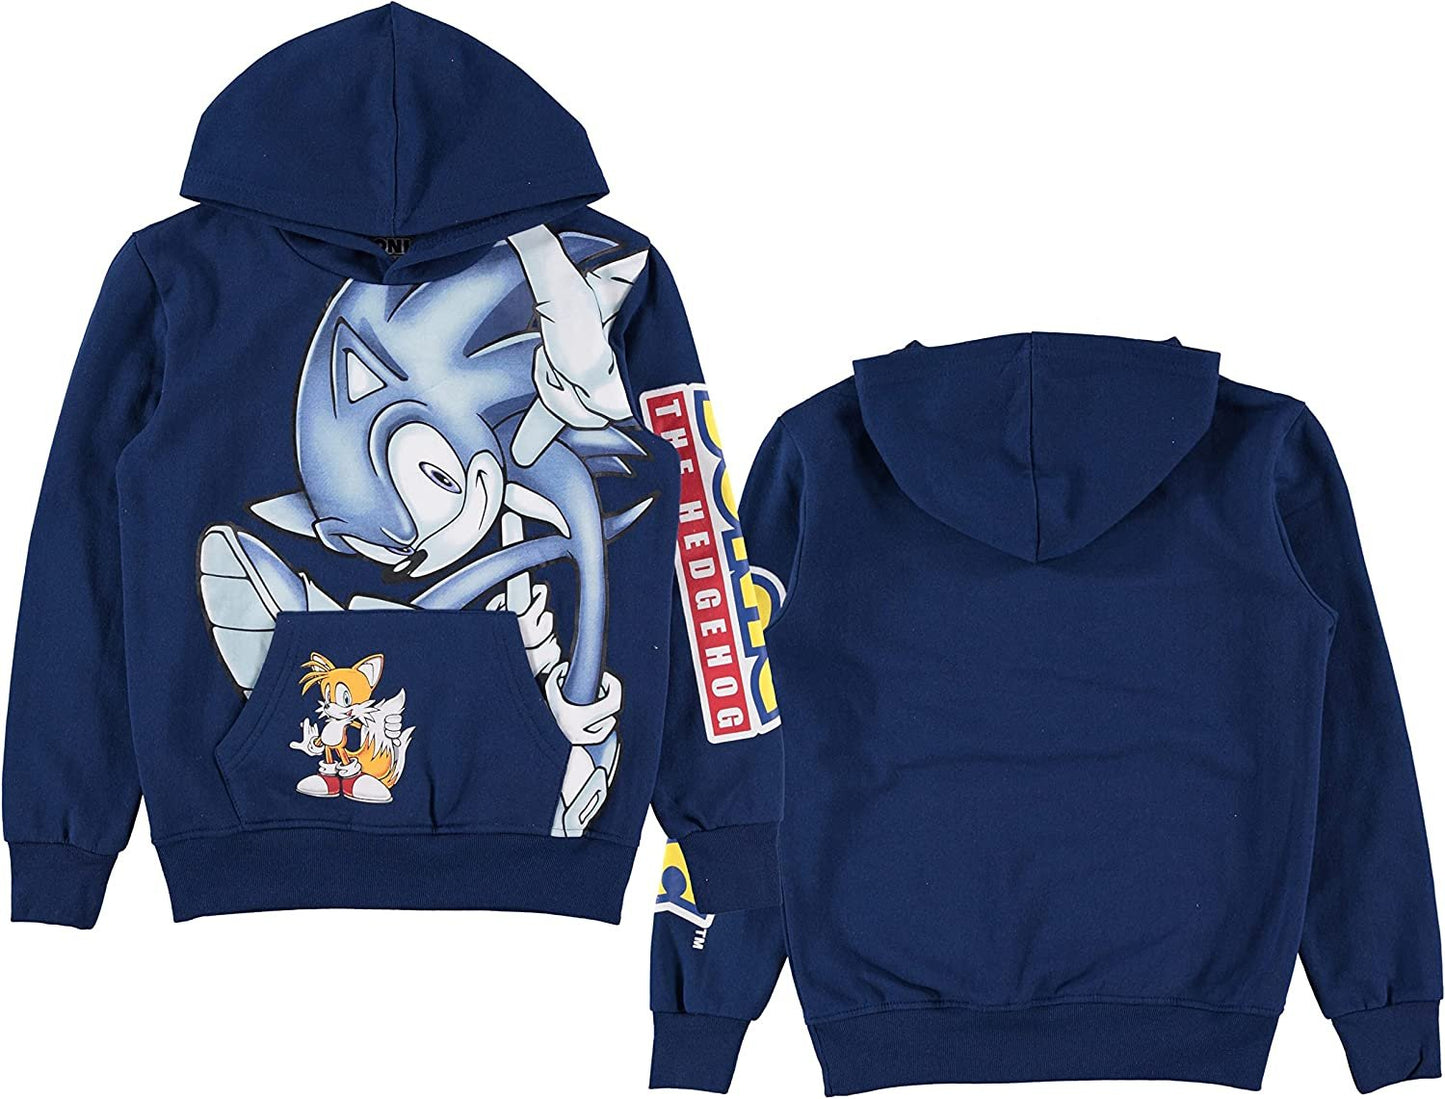 Freeze Boys' Sonic & Tails Hoodie - Navy, Sizes 4-20, Sonic the Hedgehog Pullover